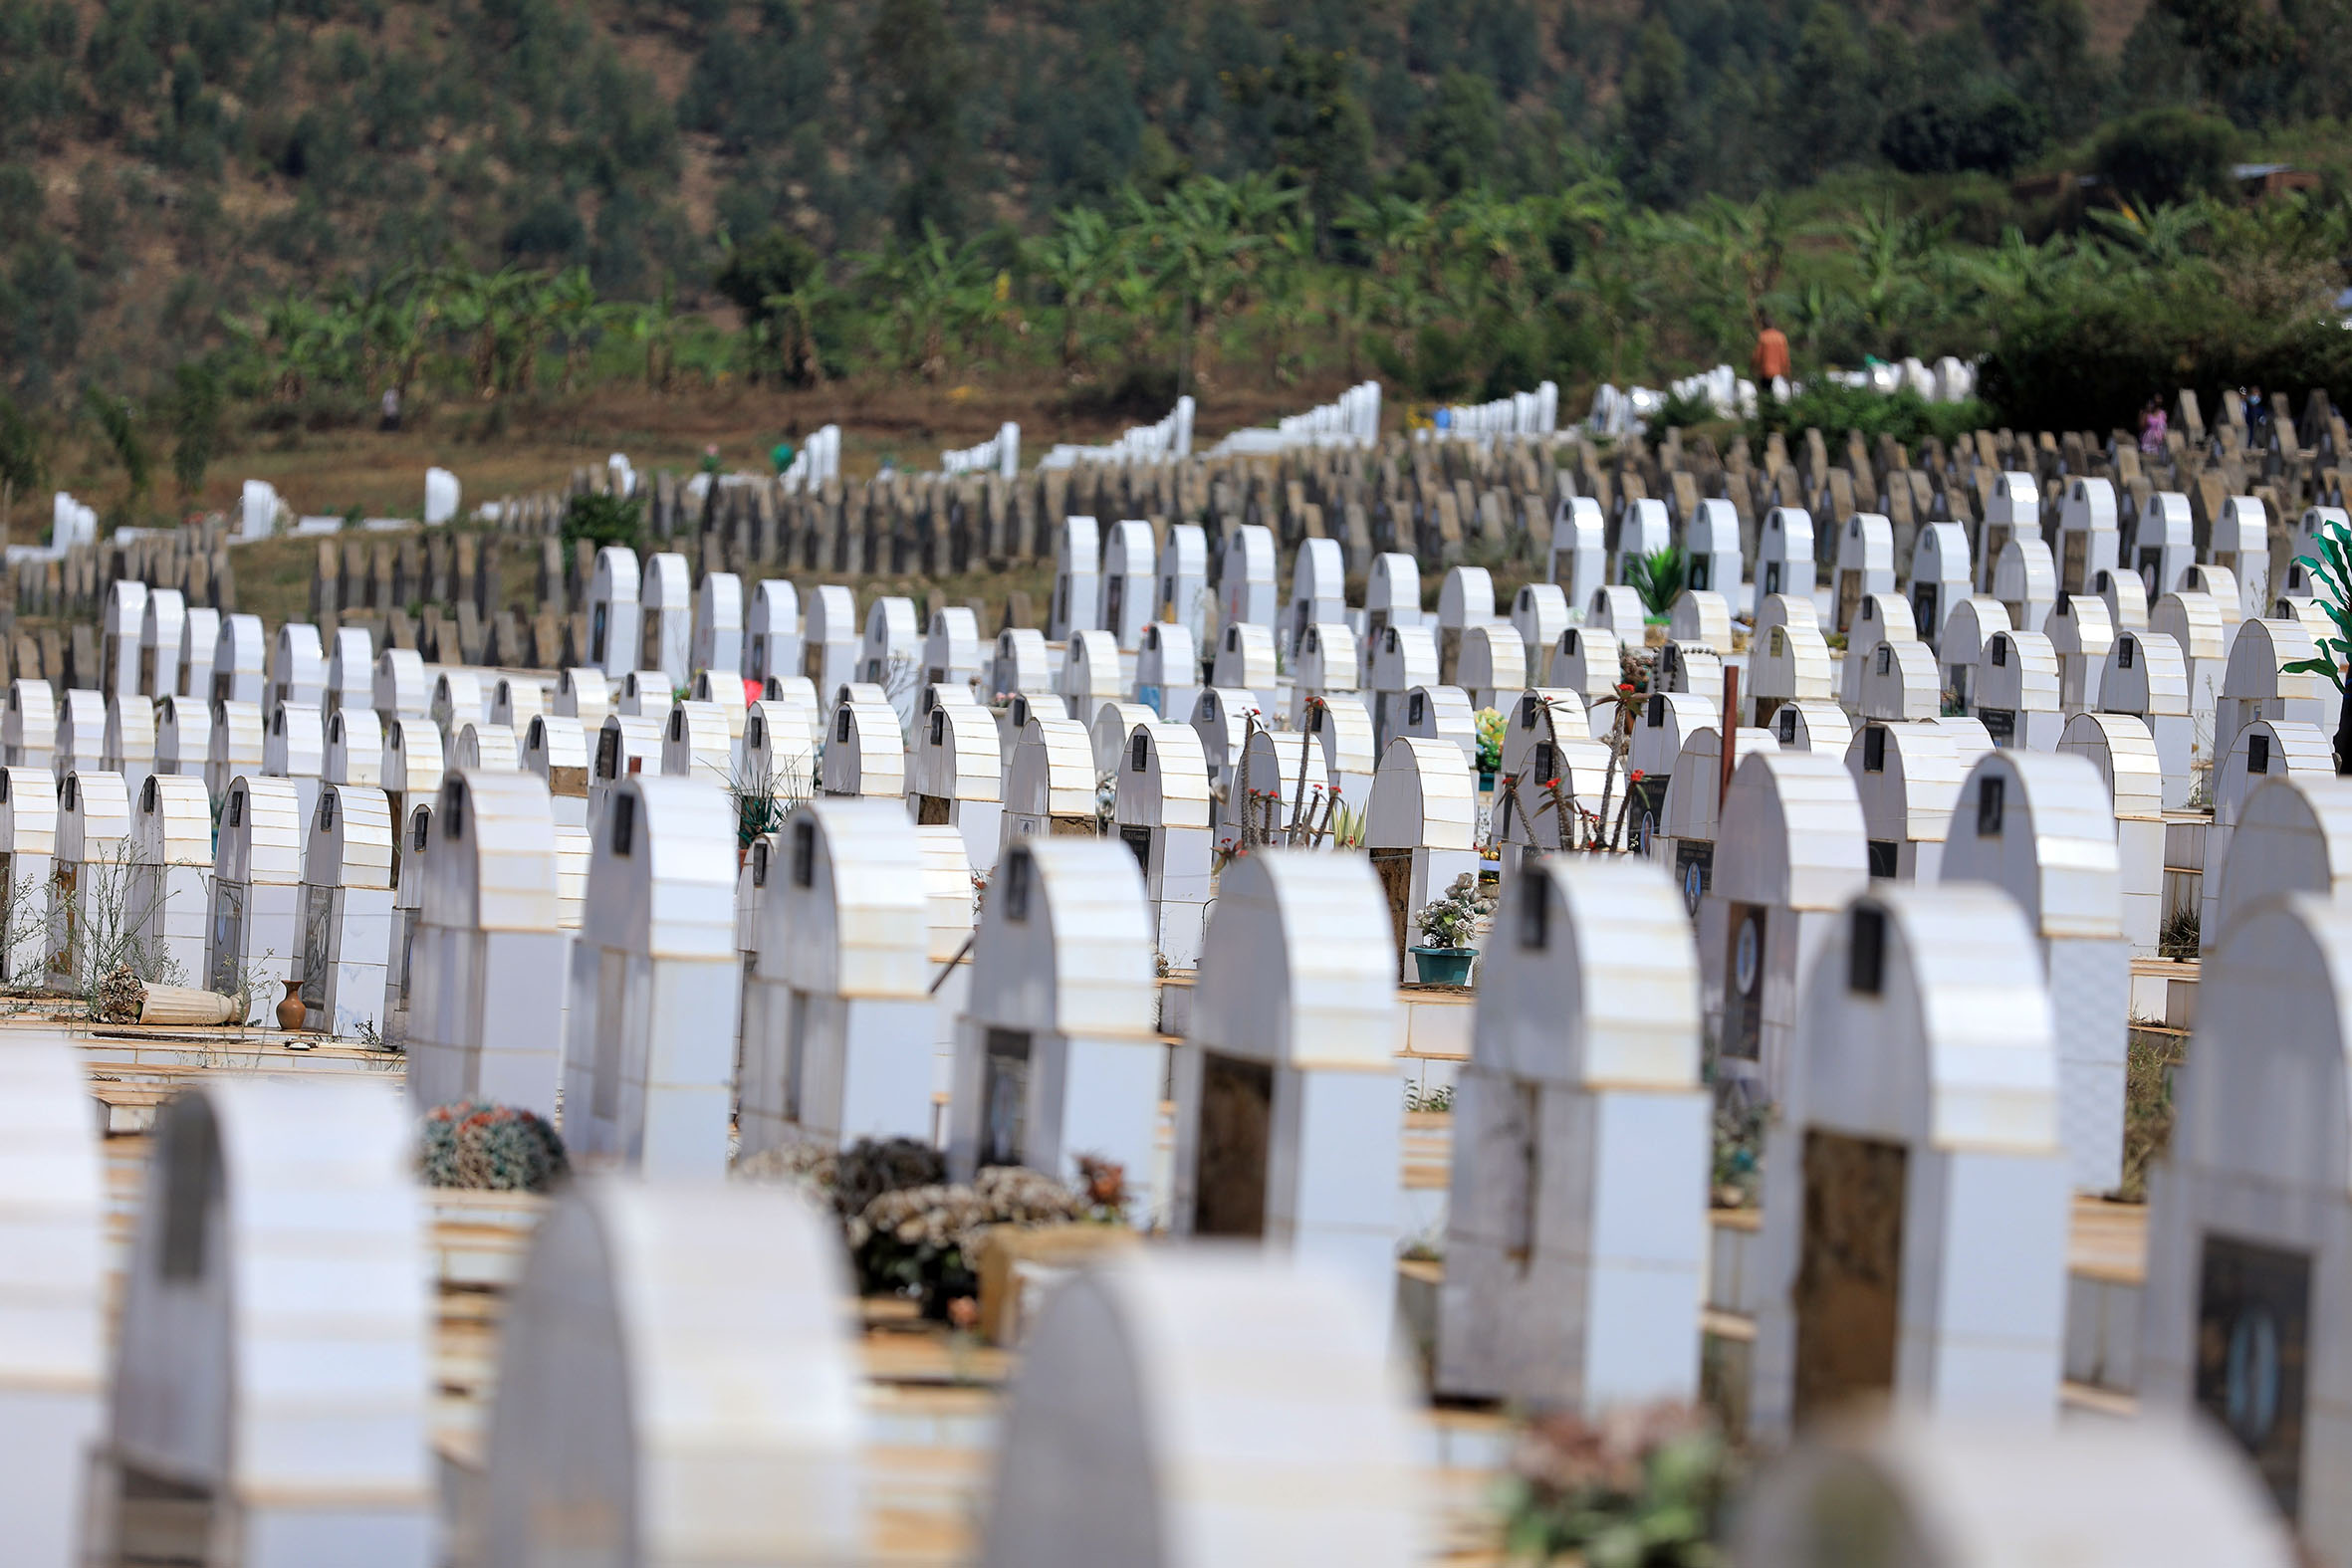 Rusororo cemetery in Gasabo District. The law determining the organisation and use of cemeteries was enacted in 2013 in Rwanda. Photo: Sam Ngendahimana.